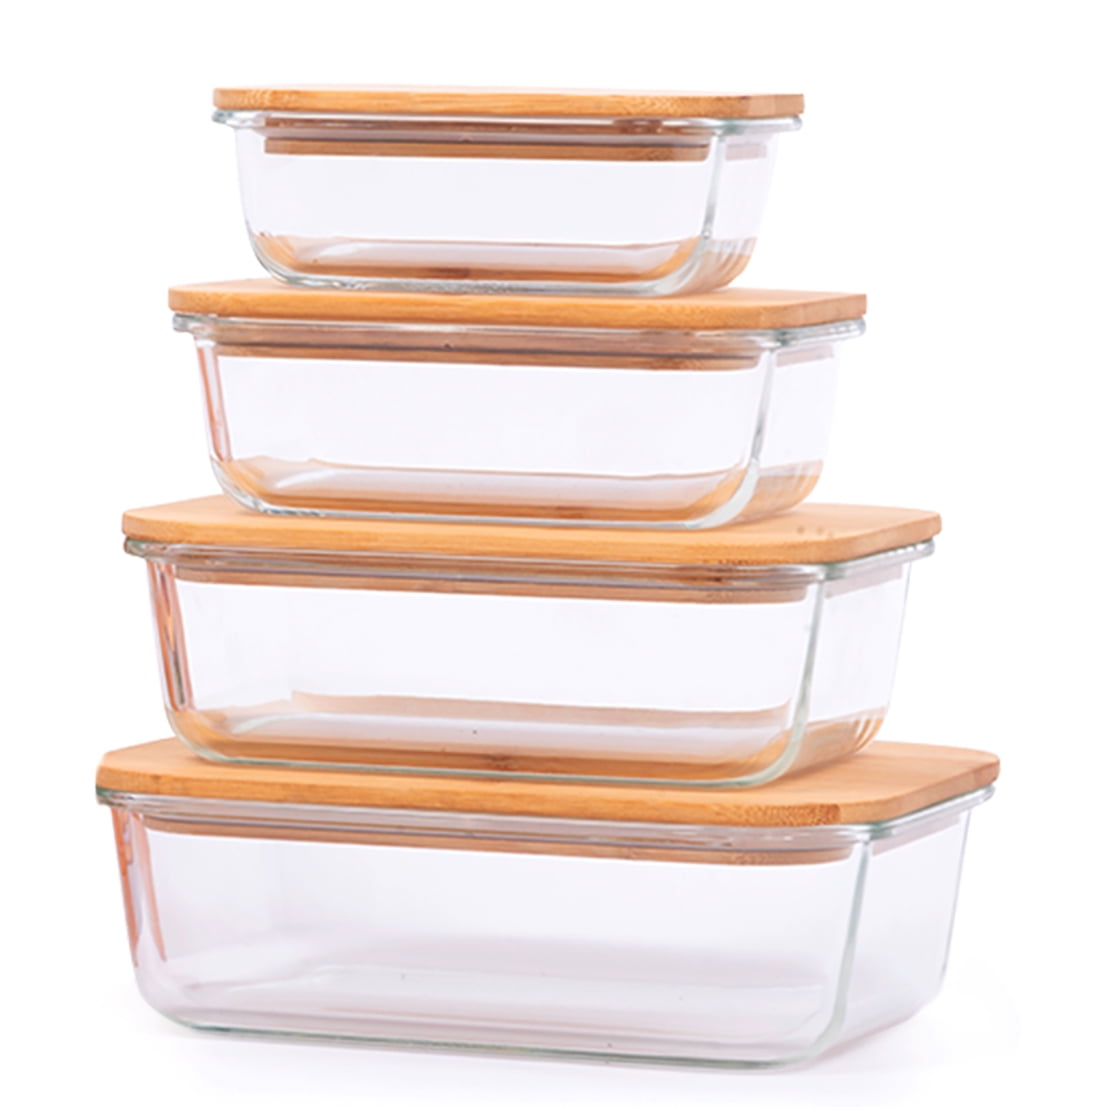 TIBLEN [4-Pack] Glass Food Storage Containers with Lids (Bamboo), Meal Prep Ecofriendly Containers with Lids for Kitchen, Home Use, Safe for Microwave,Freezer, BPA Free (370mL, 640mL, 1040mL, 1520mL)